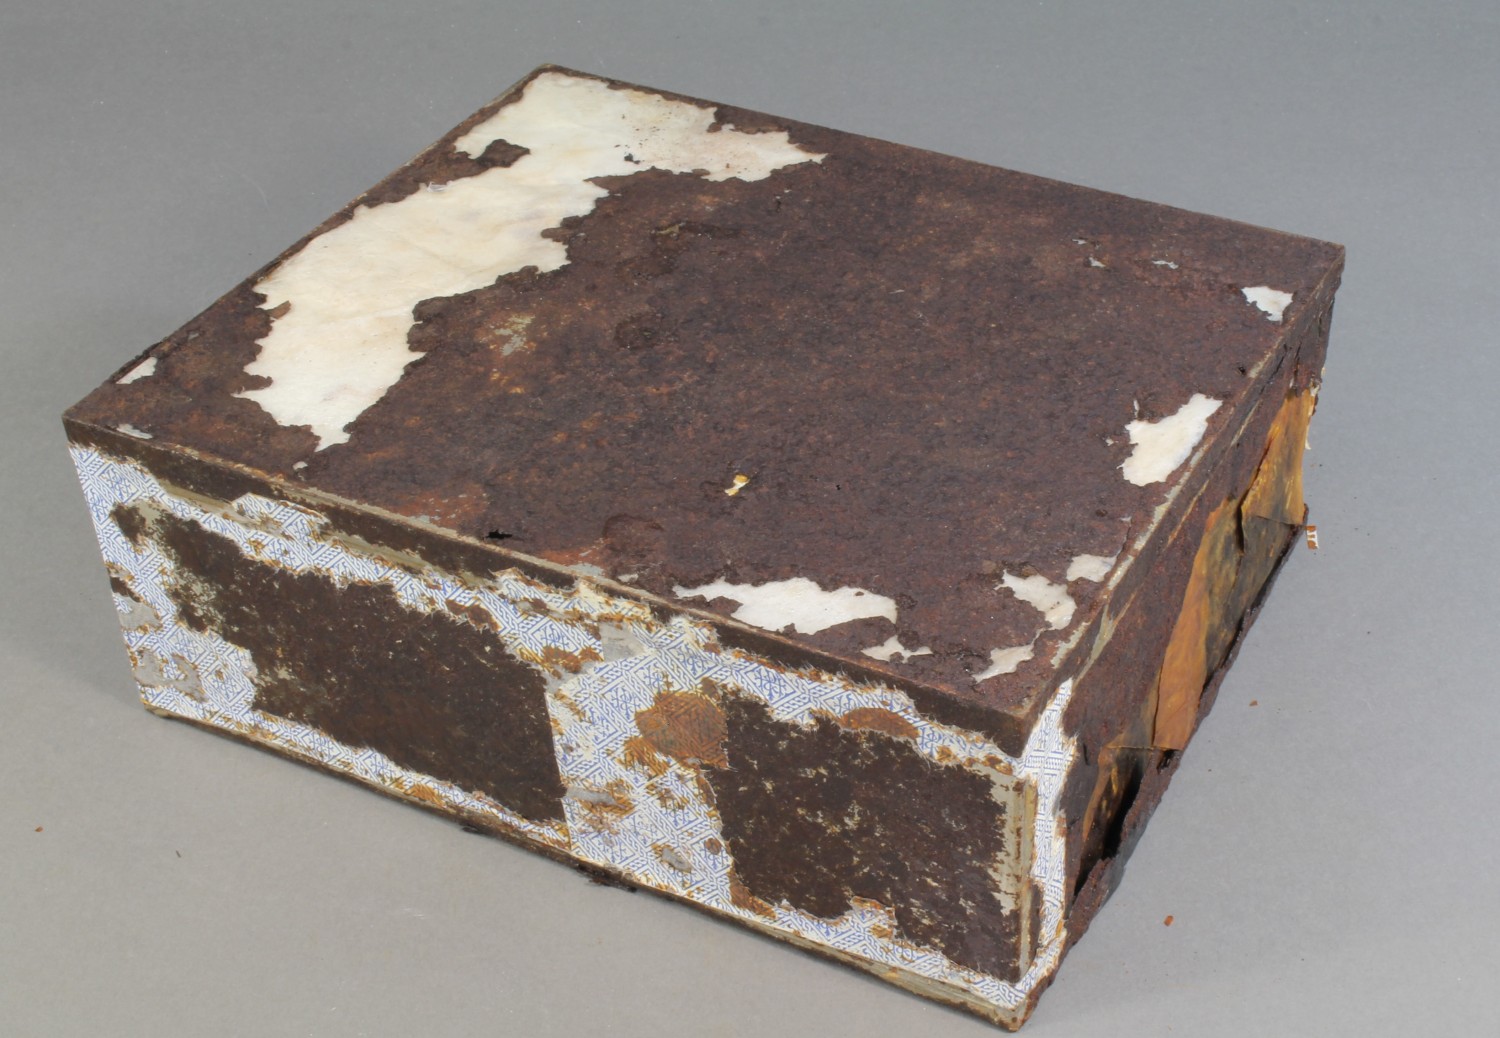 Hundred-Year-Old Antarctic Fruitcake Found In ‘Excellent Condition’